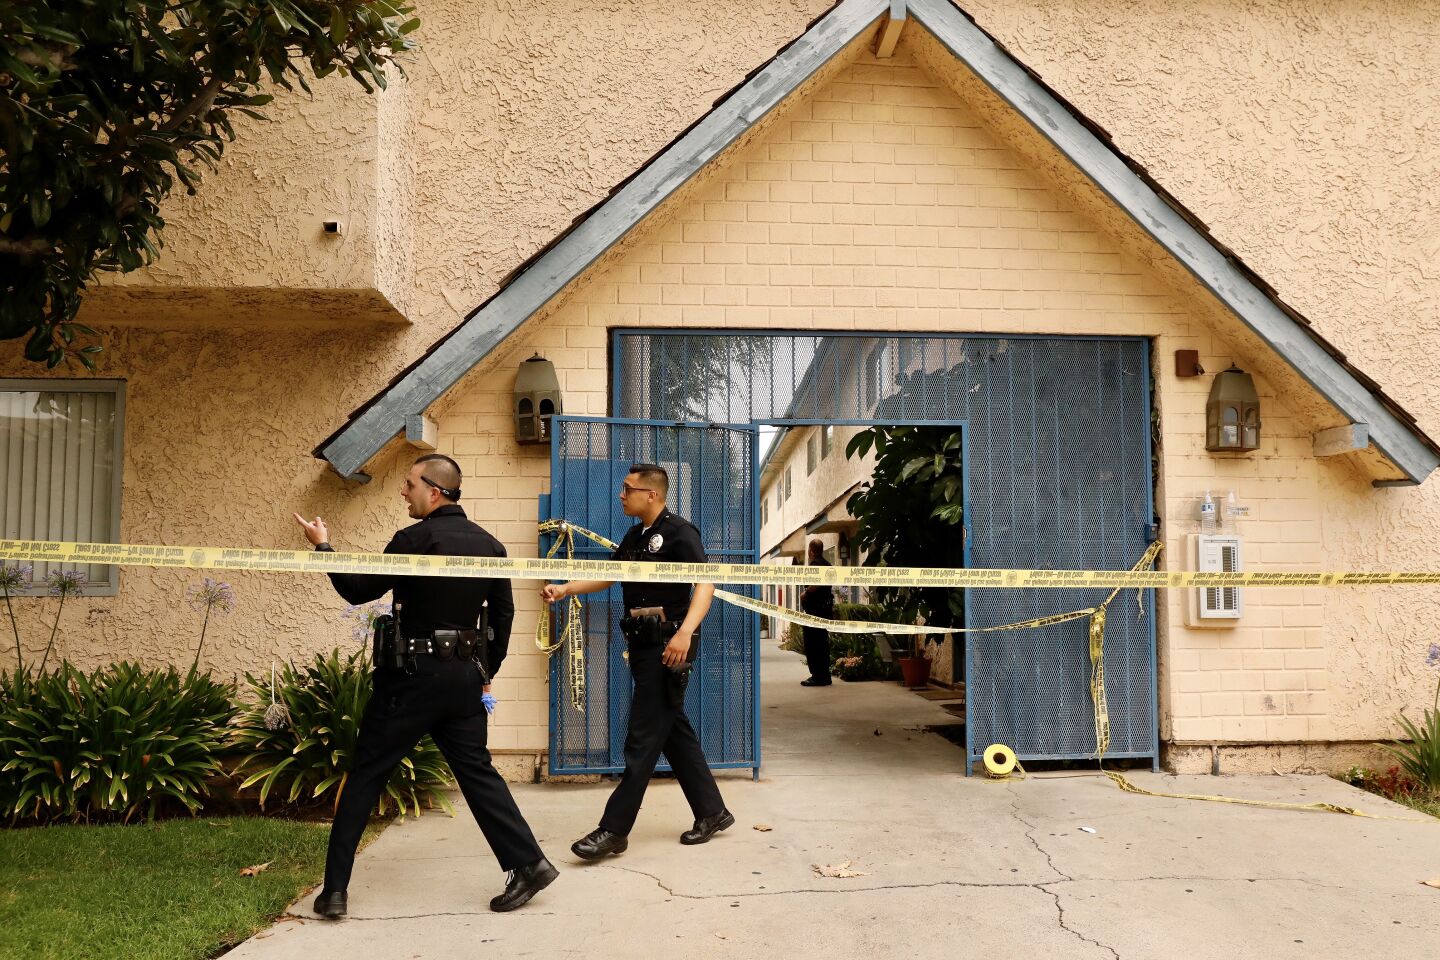 An investigation is underway after a triple shooting that killed two people and wounded a third at an apartment in Canoga Park early Thursday.